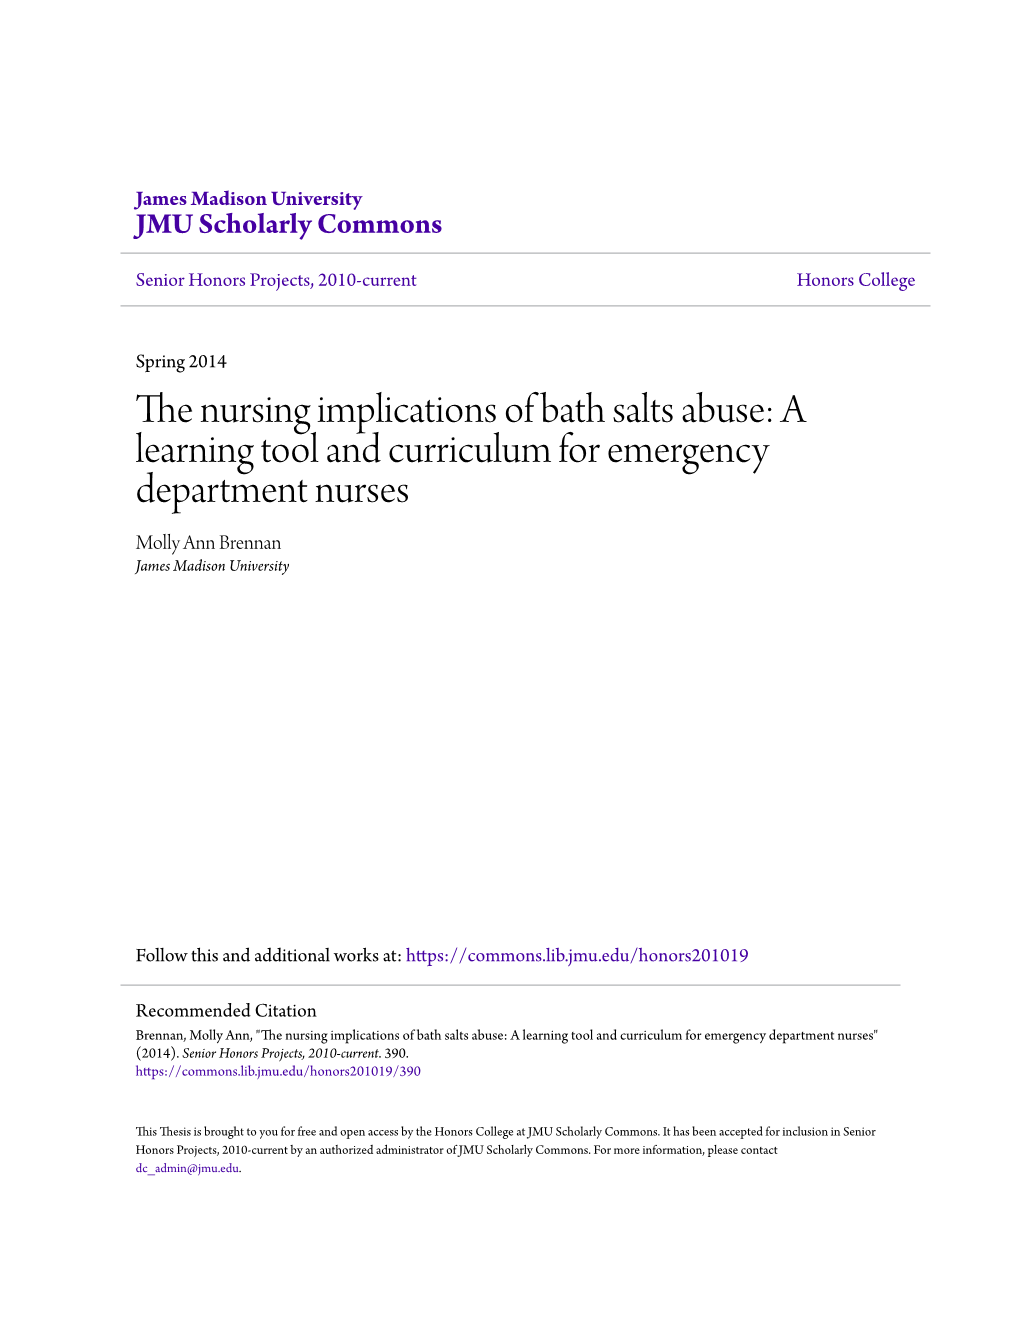 The Nursing Implications of Bath Salts Abuse: a Learning Tool and Curriculum for Emergency